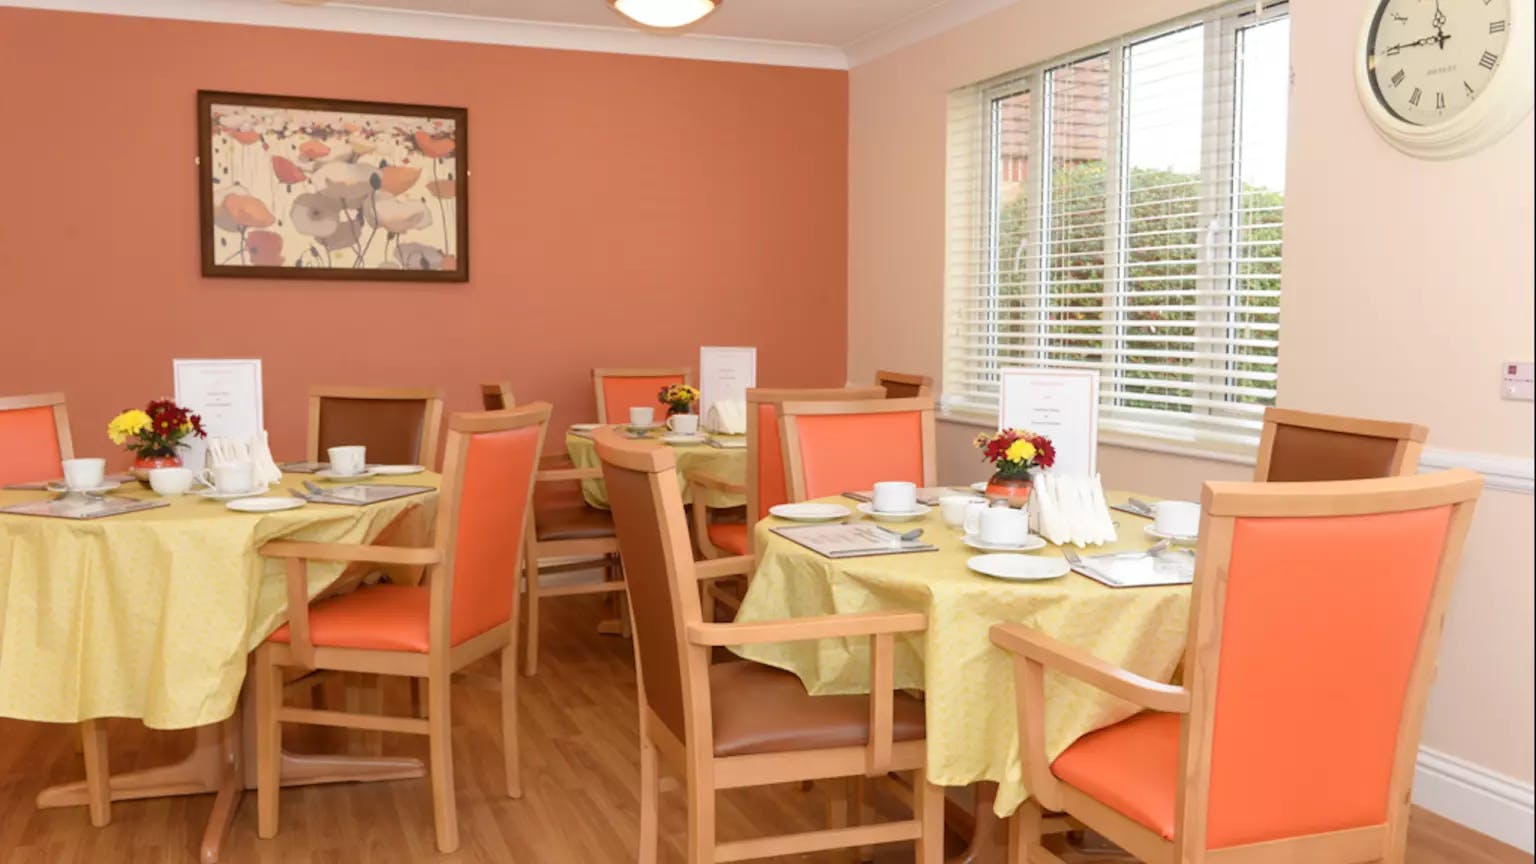 Dining area of Mayfair Lodge care home in Watkins Rise, Hertfordshire